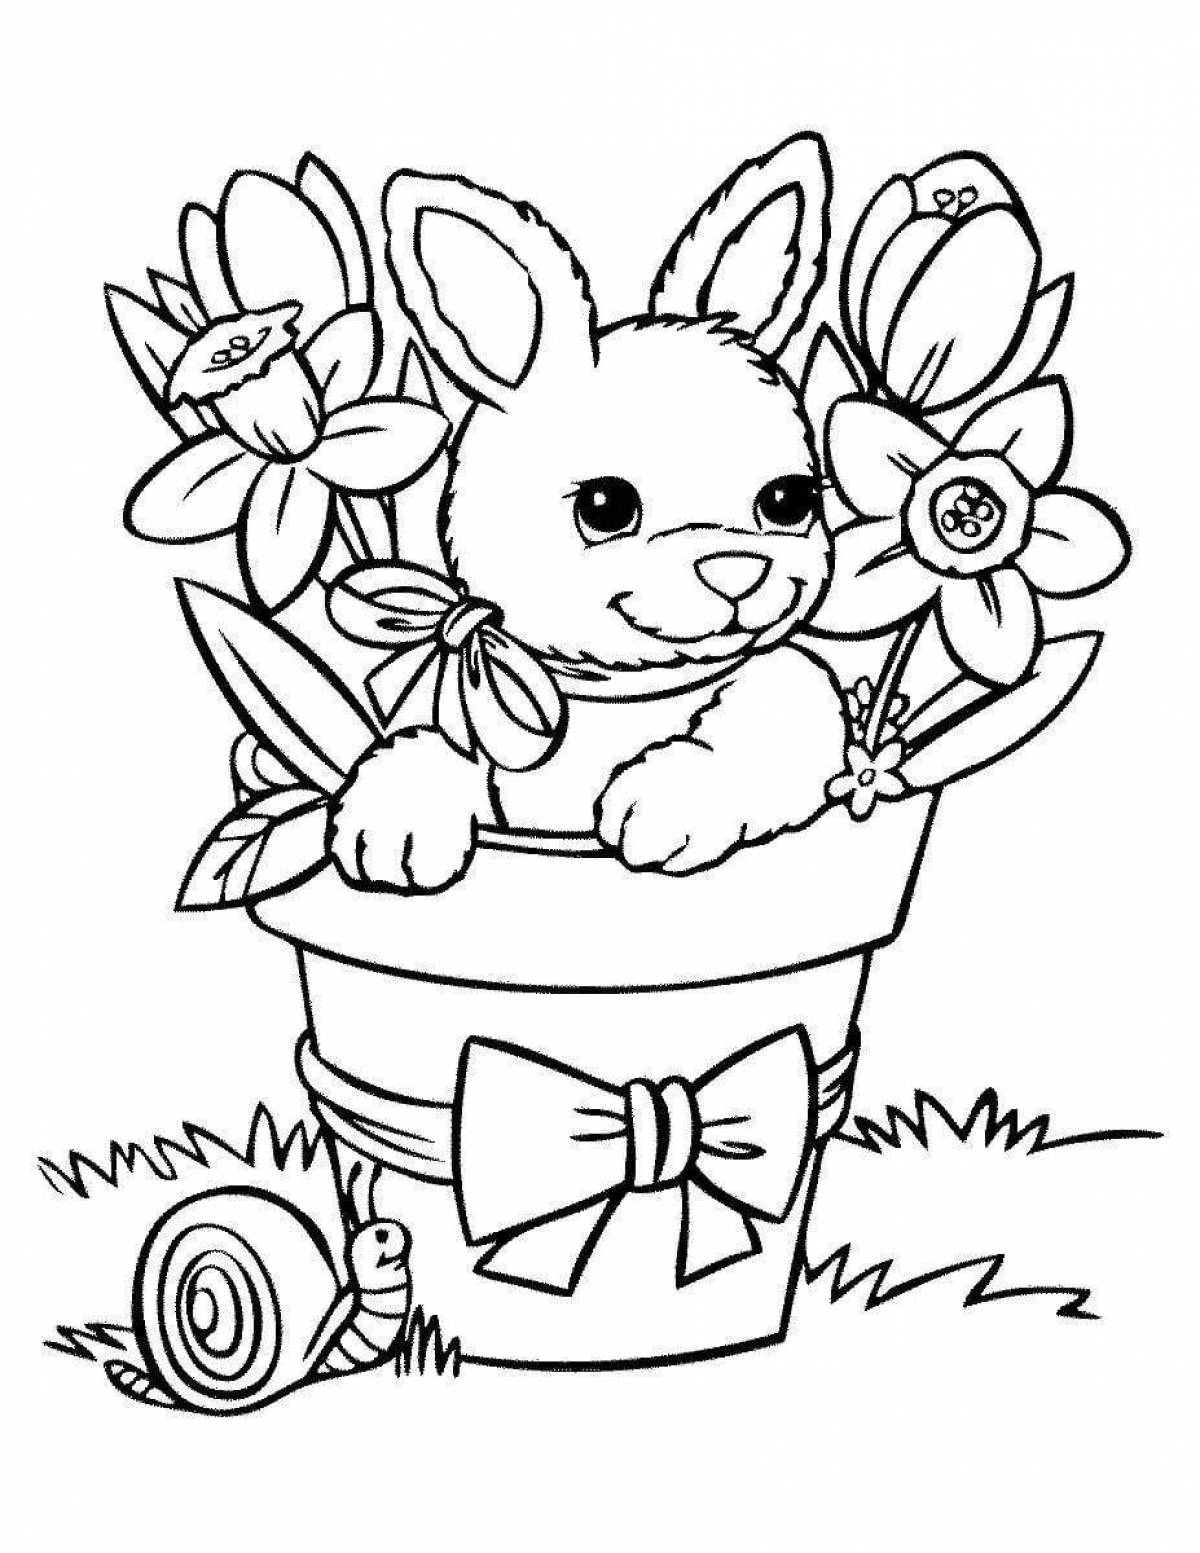 Fabulous hare coloring book for children 6-7 years old